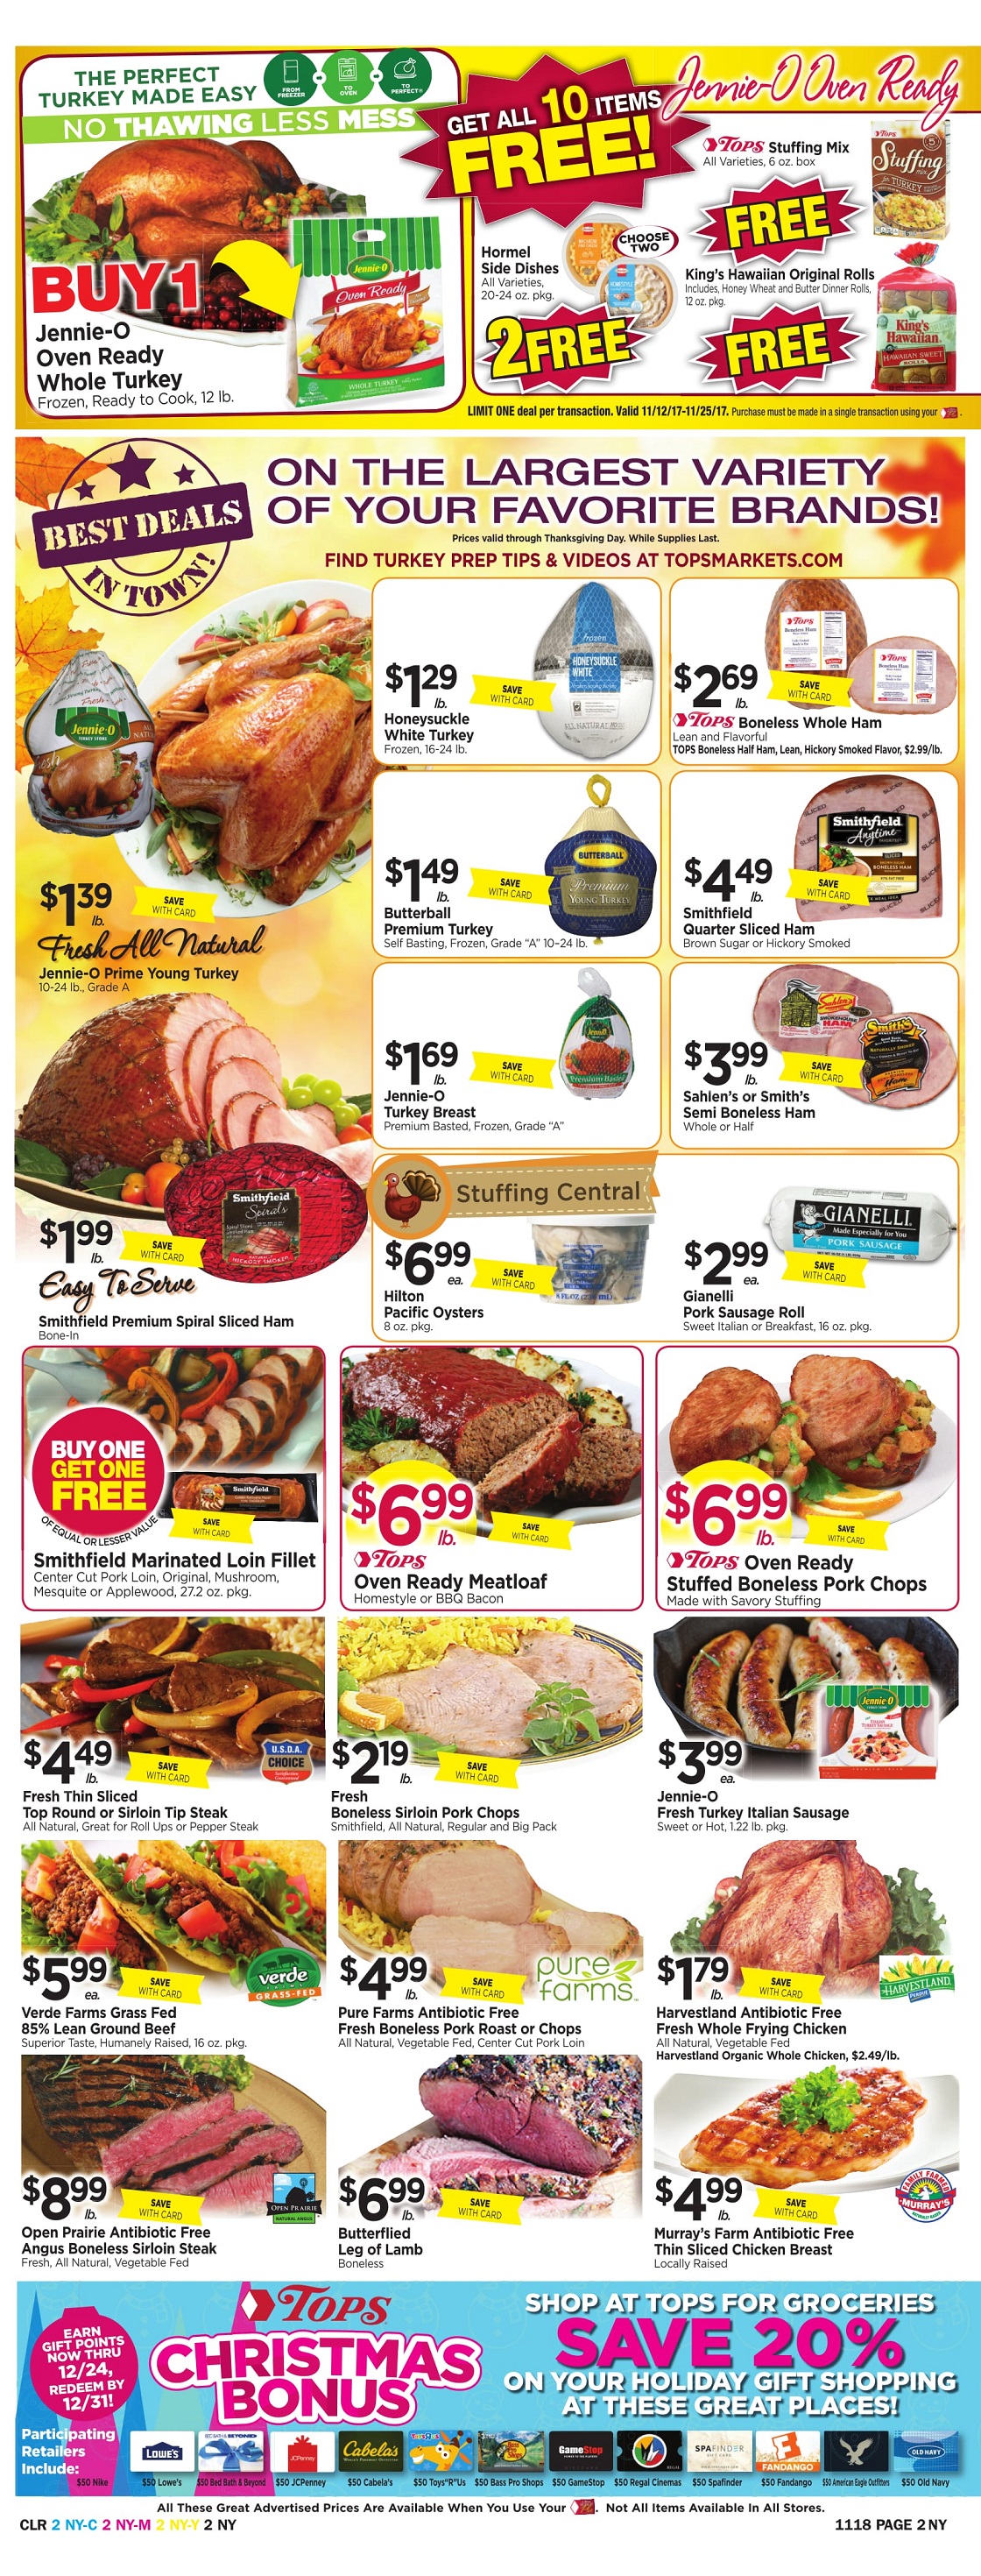 Tops Markets Ad Scan Week Pf 11 12 Page 2